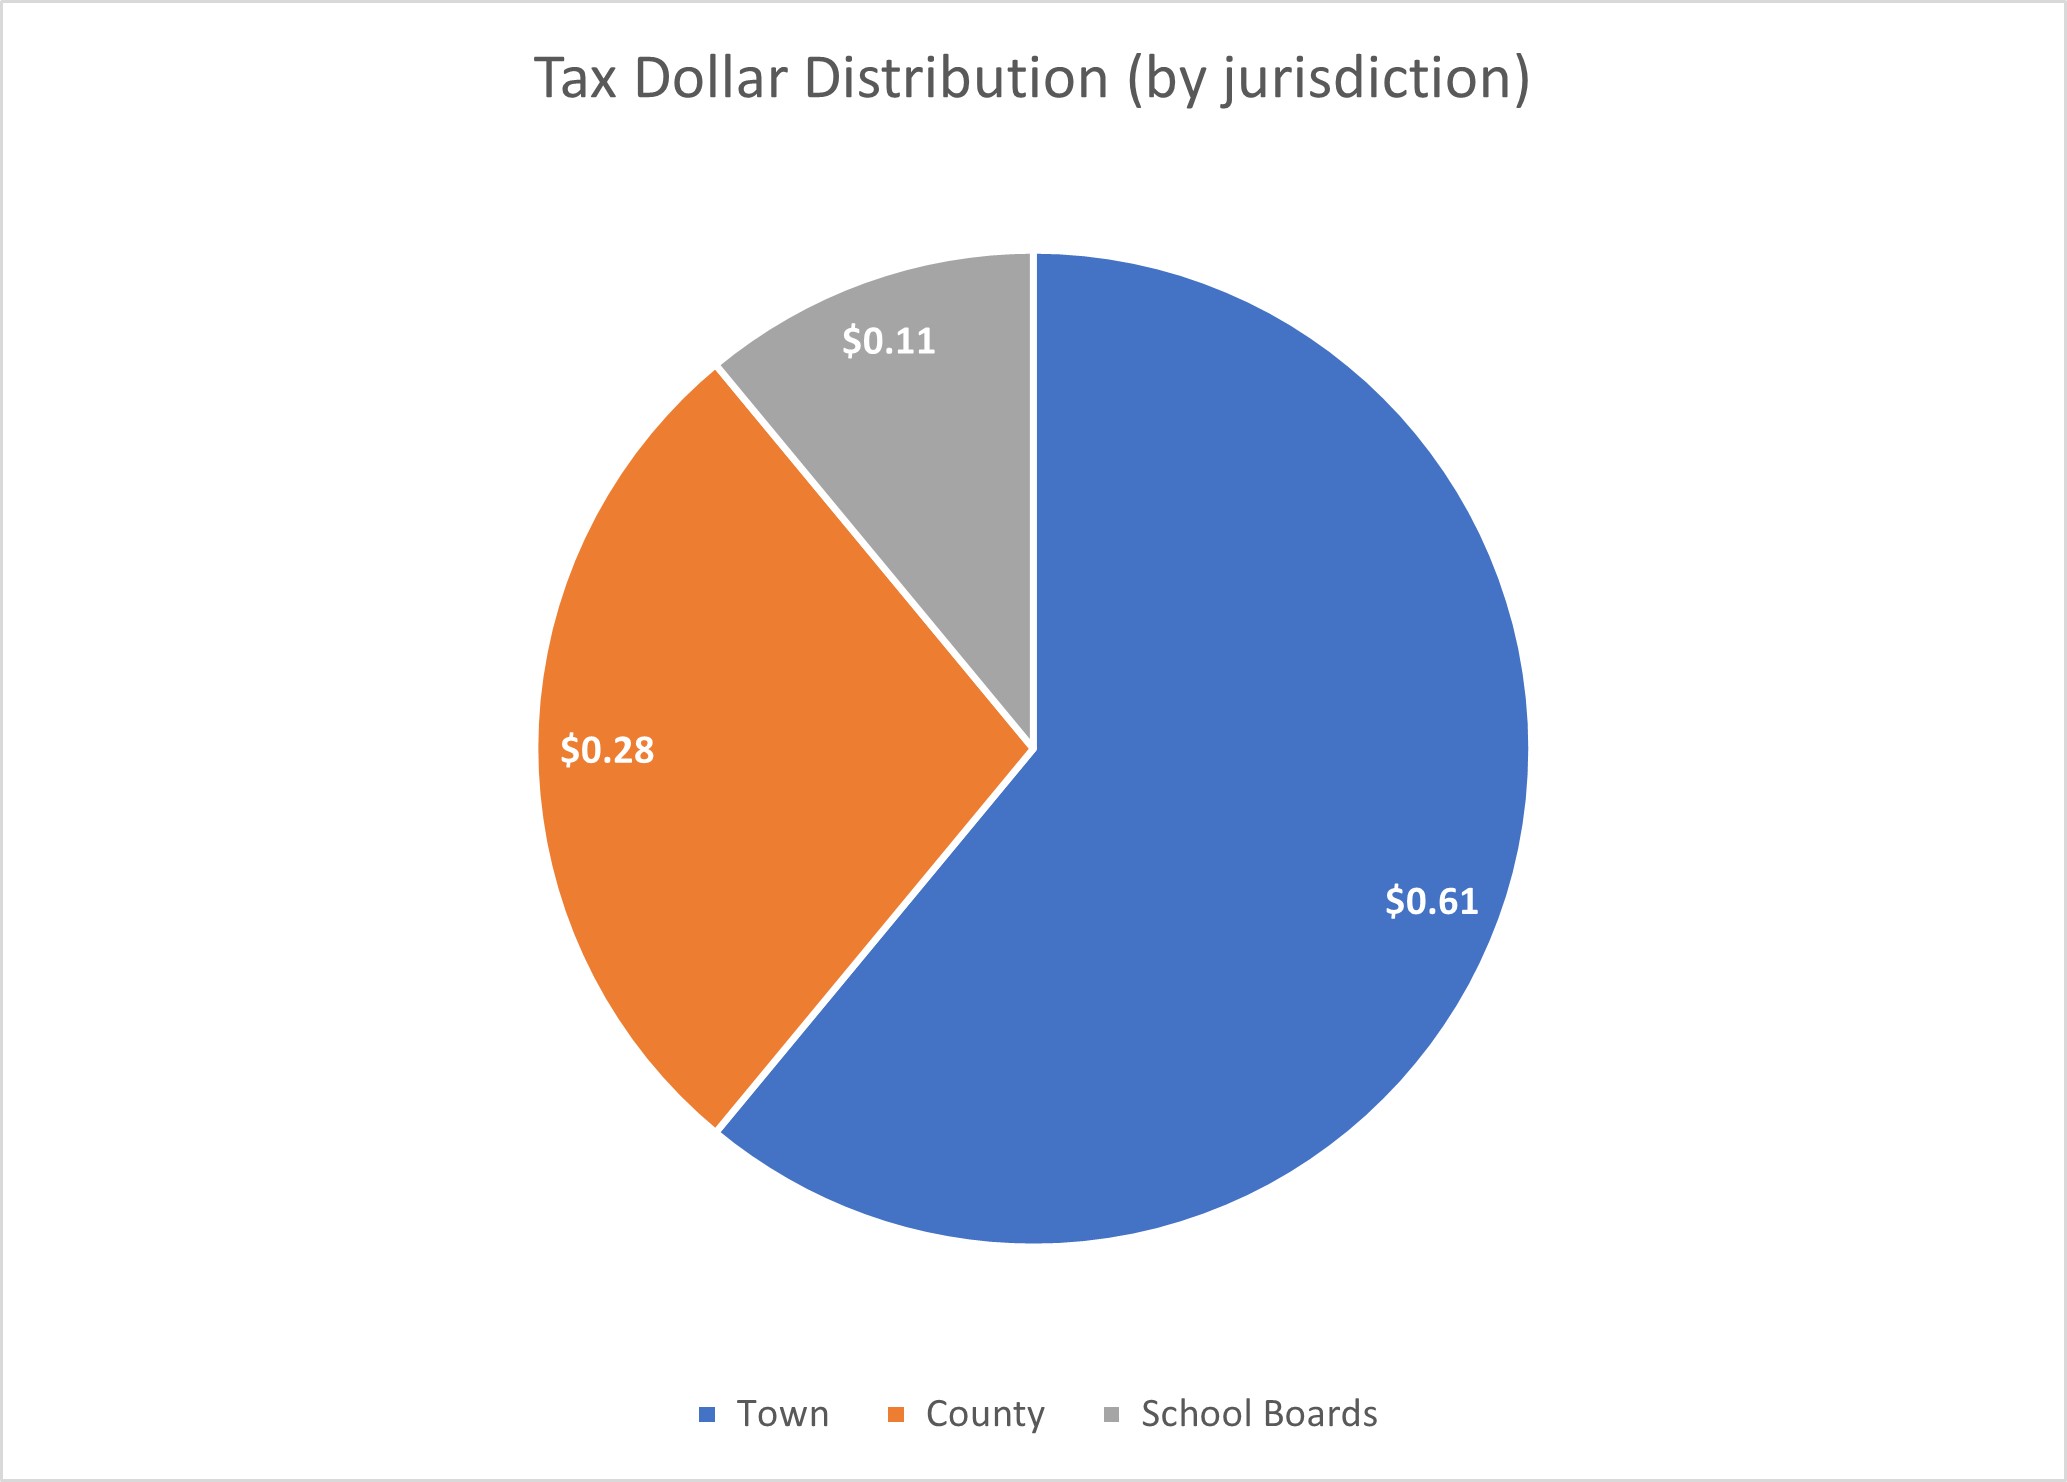 A graph depicting where tax dollars are distributed based on jurisdiction. The graph indicates that for every municipal tax dollar, $0.61 goes to the Town, $0.28 to Dufferin County, and $0.11 to the school board.